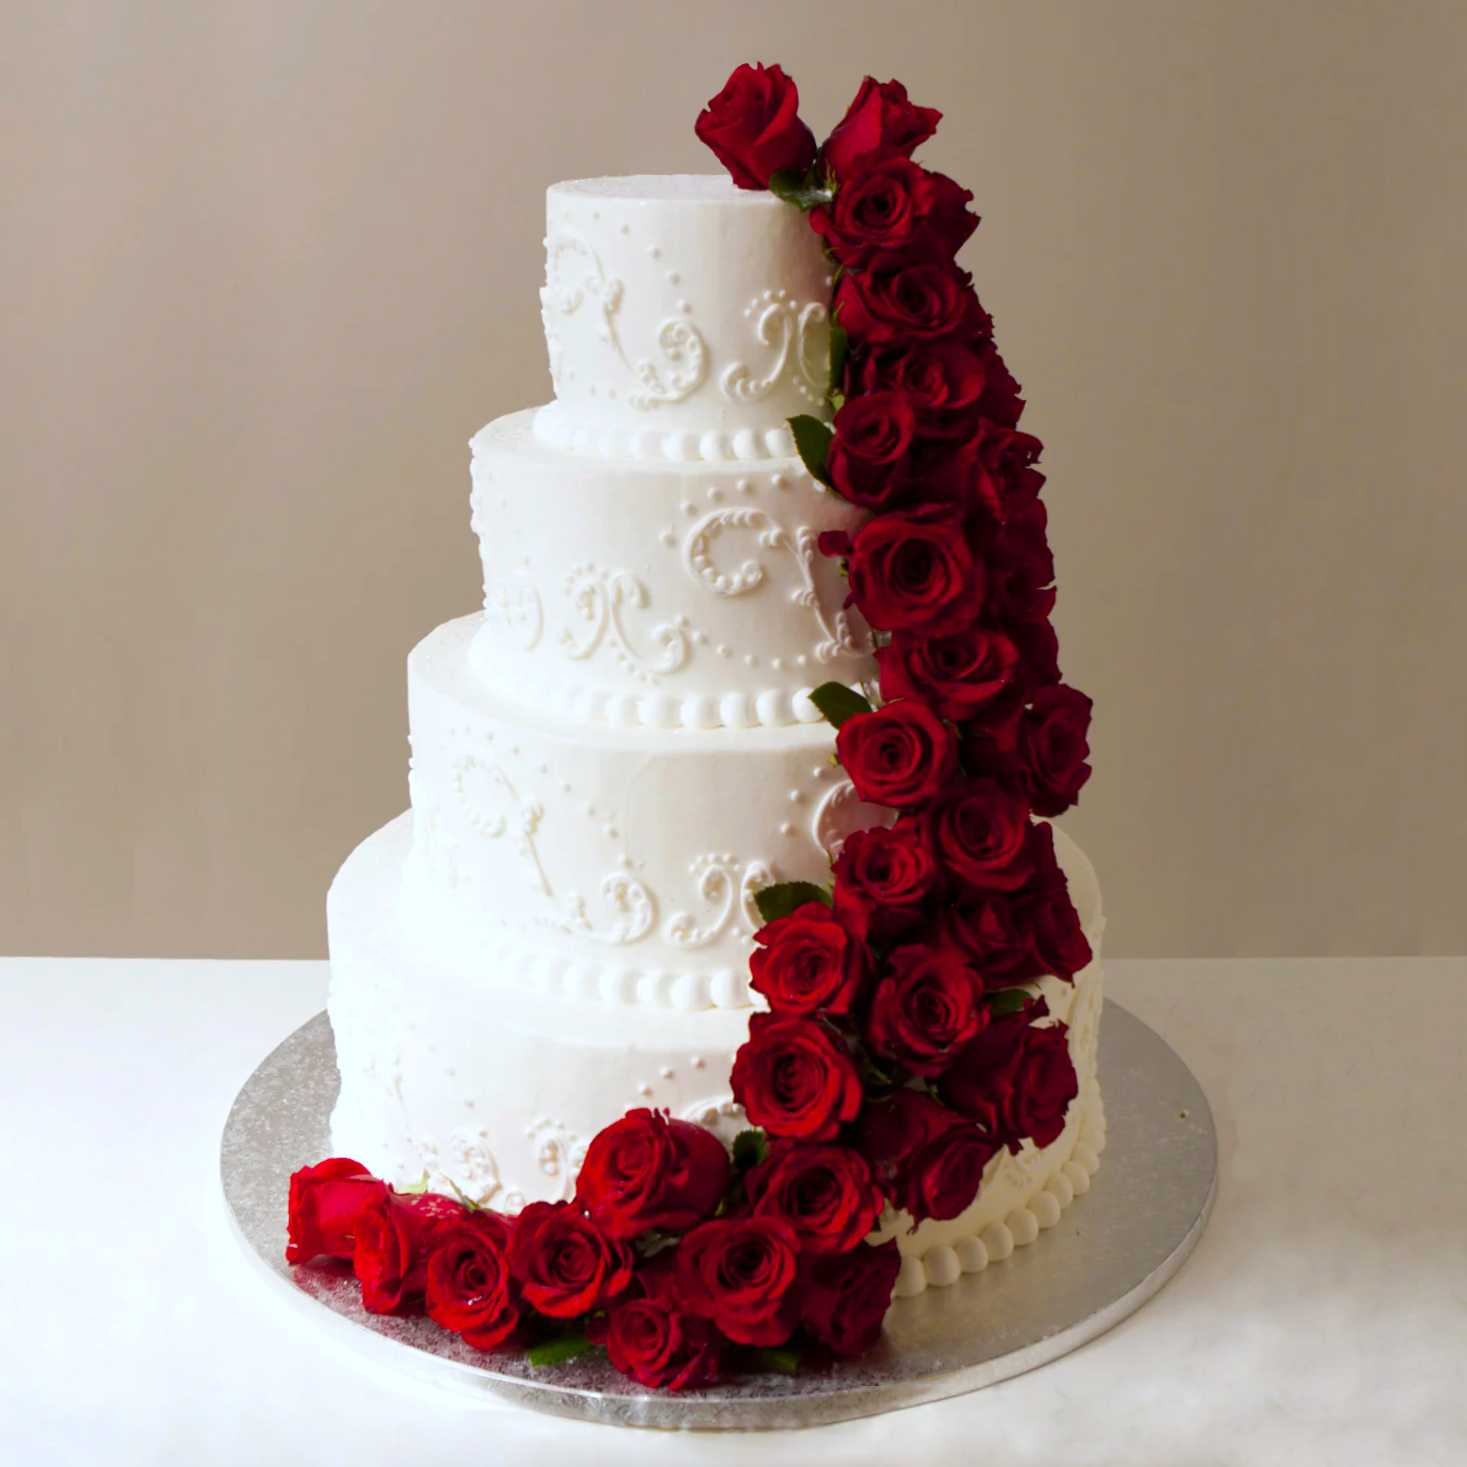 Photo of a four tier cake with red roses.